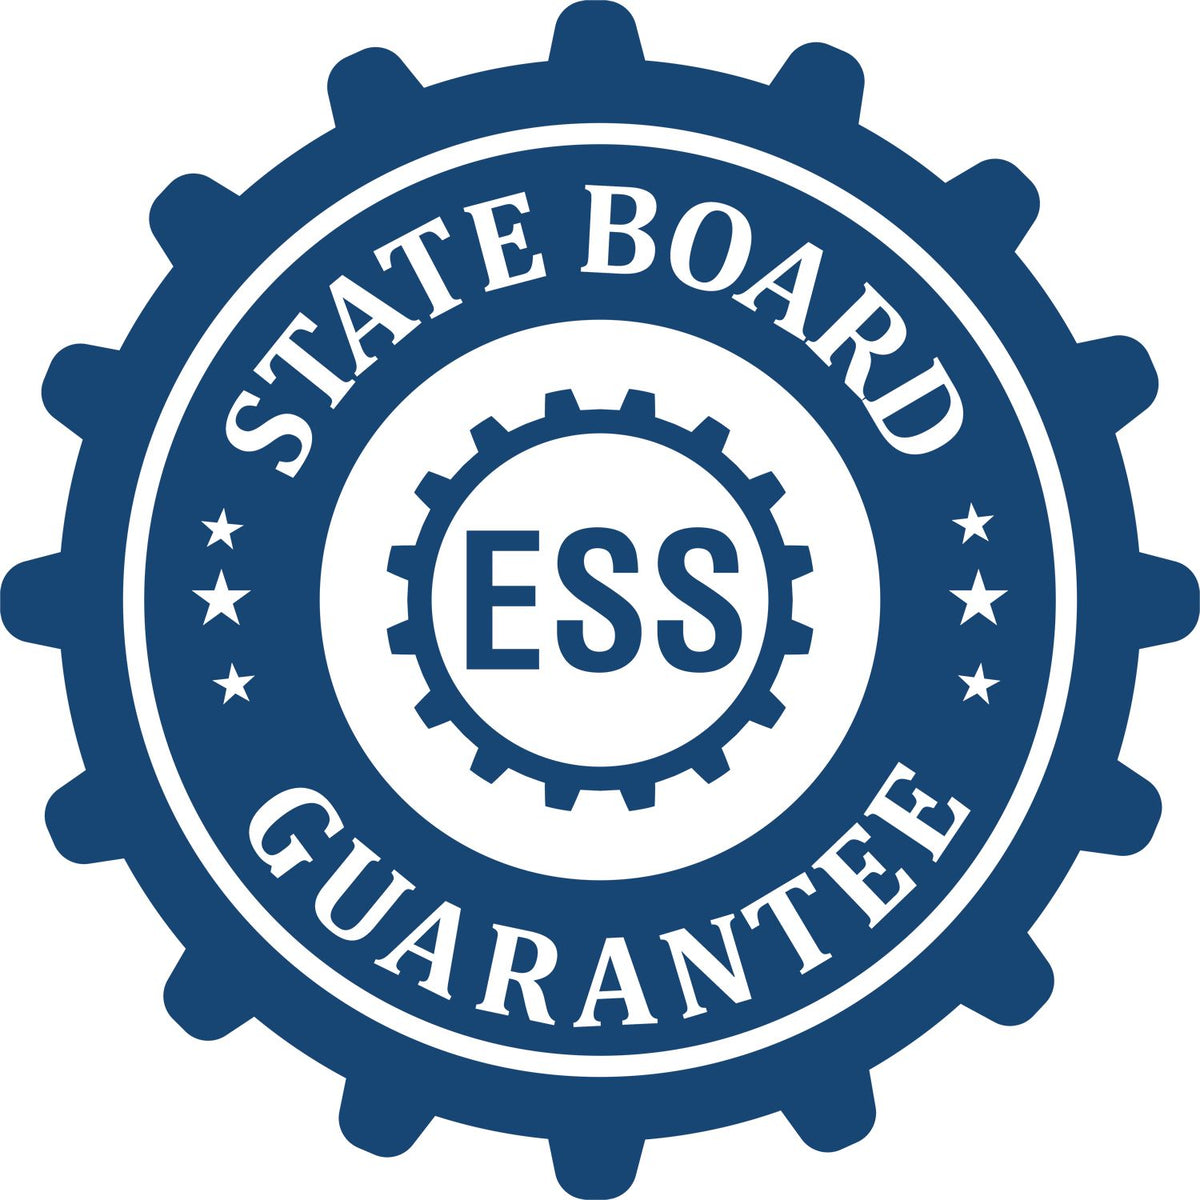 An emblem in a gear shape illustrating a state board guarantee for the Hybrid South Carolina Engineer Seal